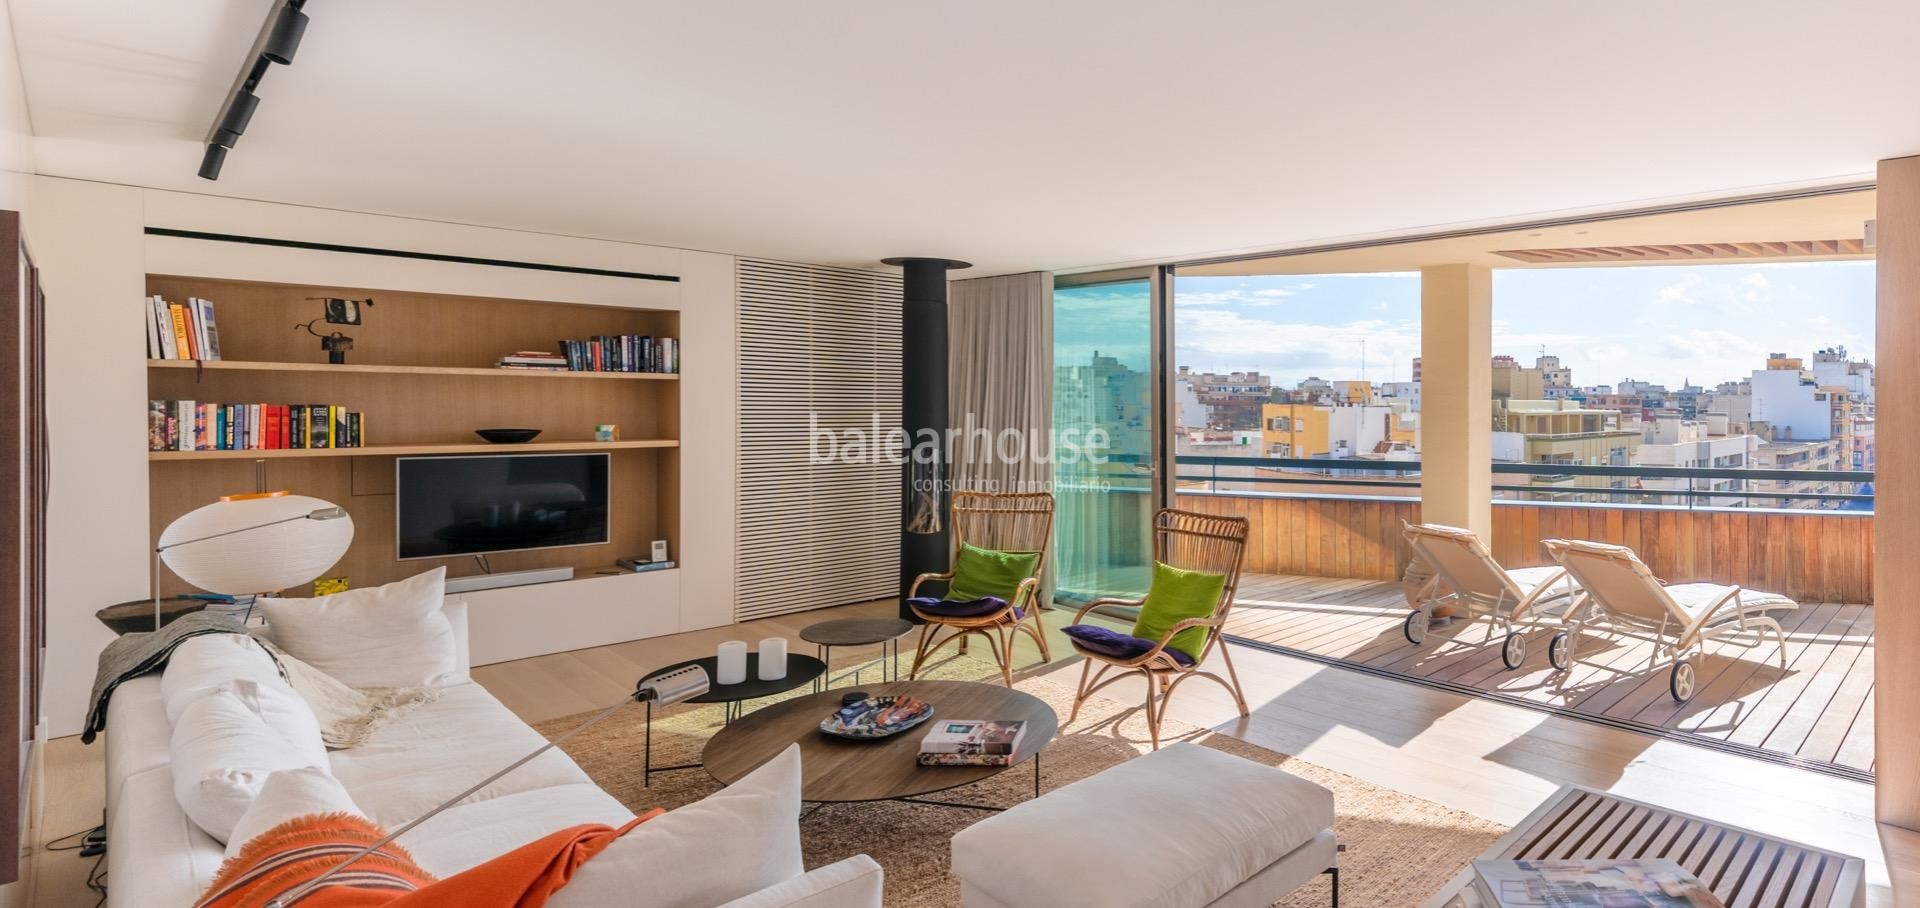 Extraordinary penthouse with large terrace and contemporary aesthetics in the centre of Palma.